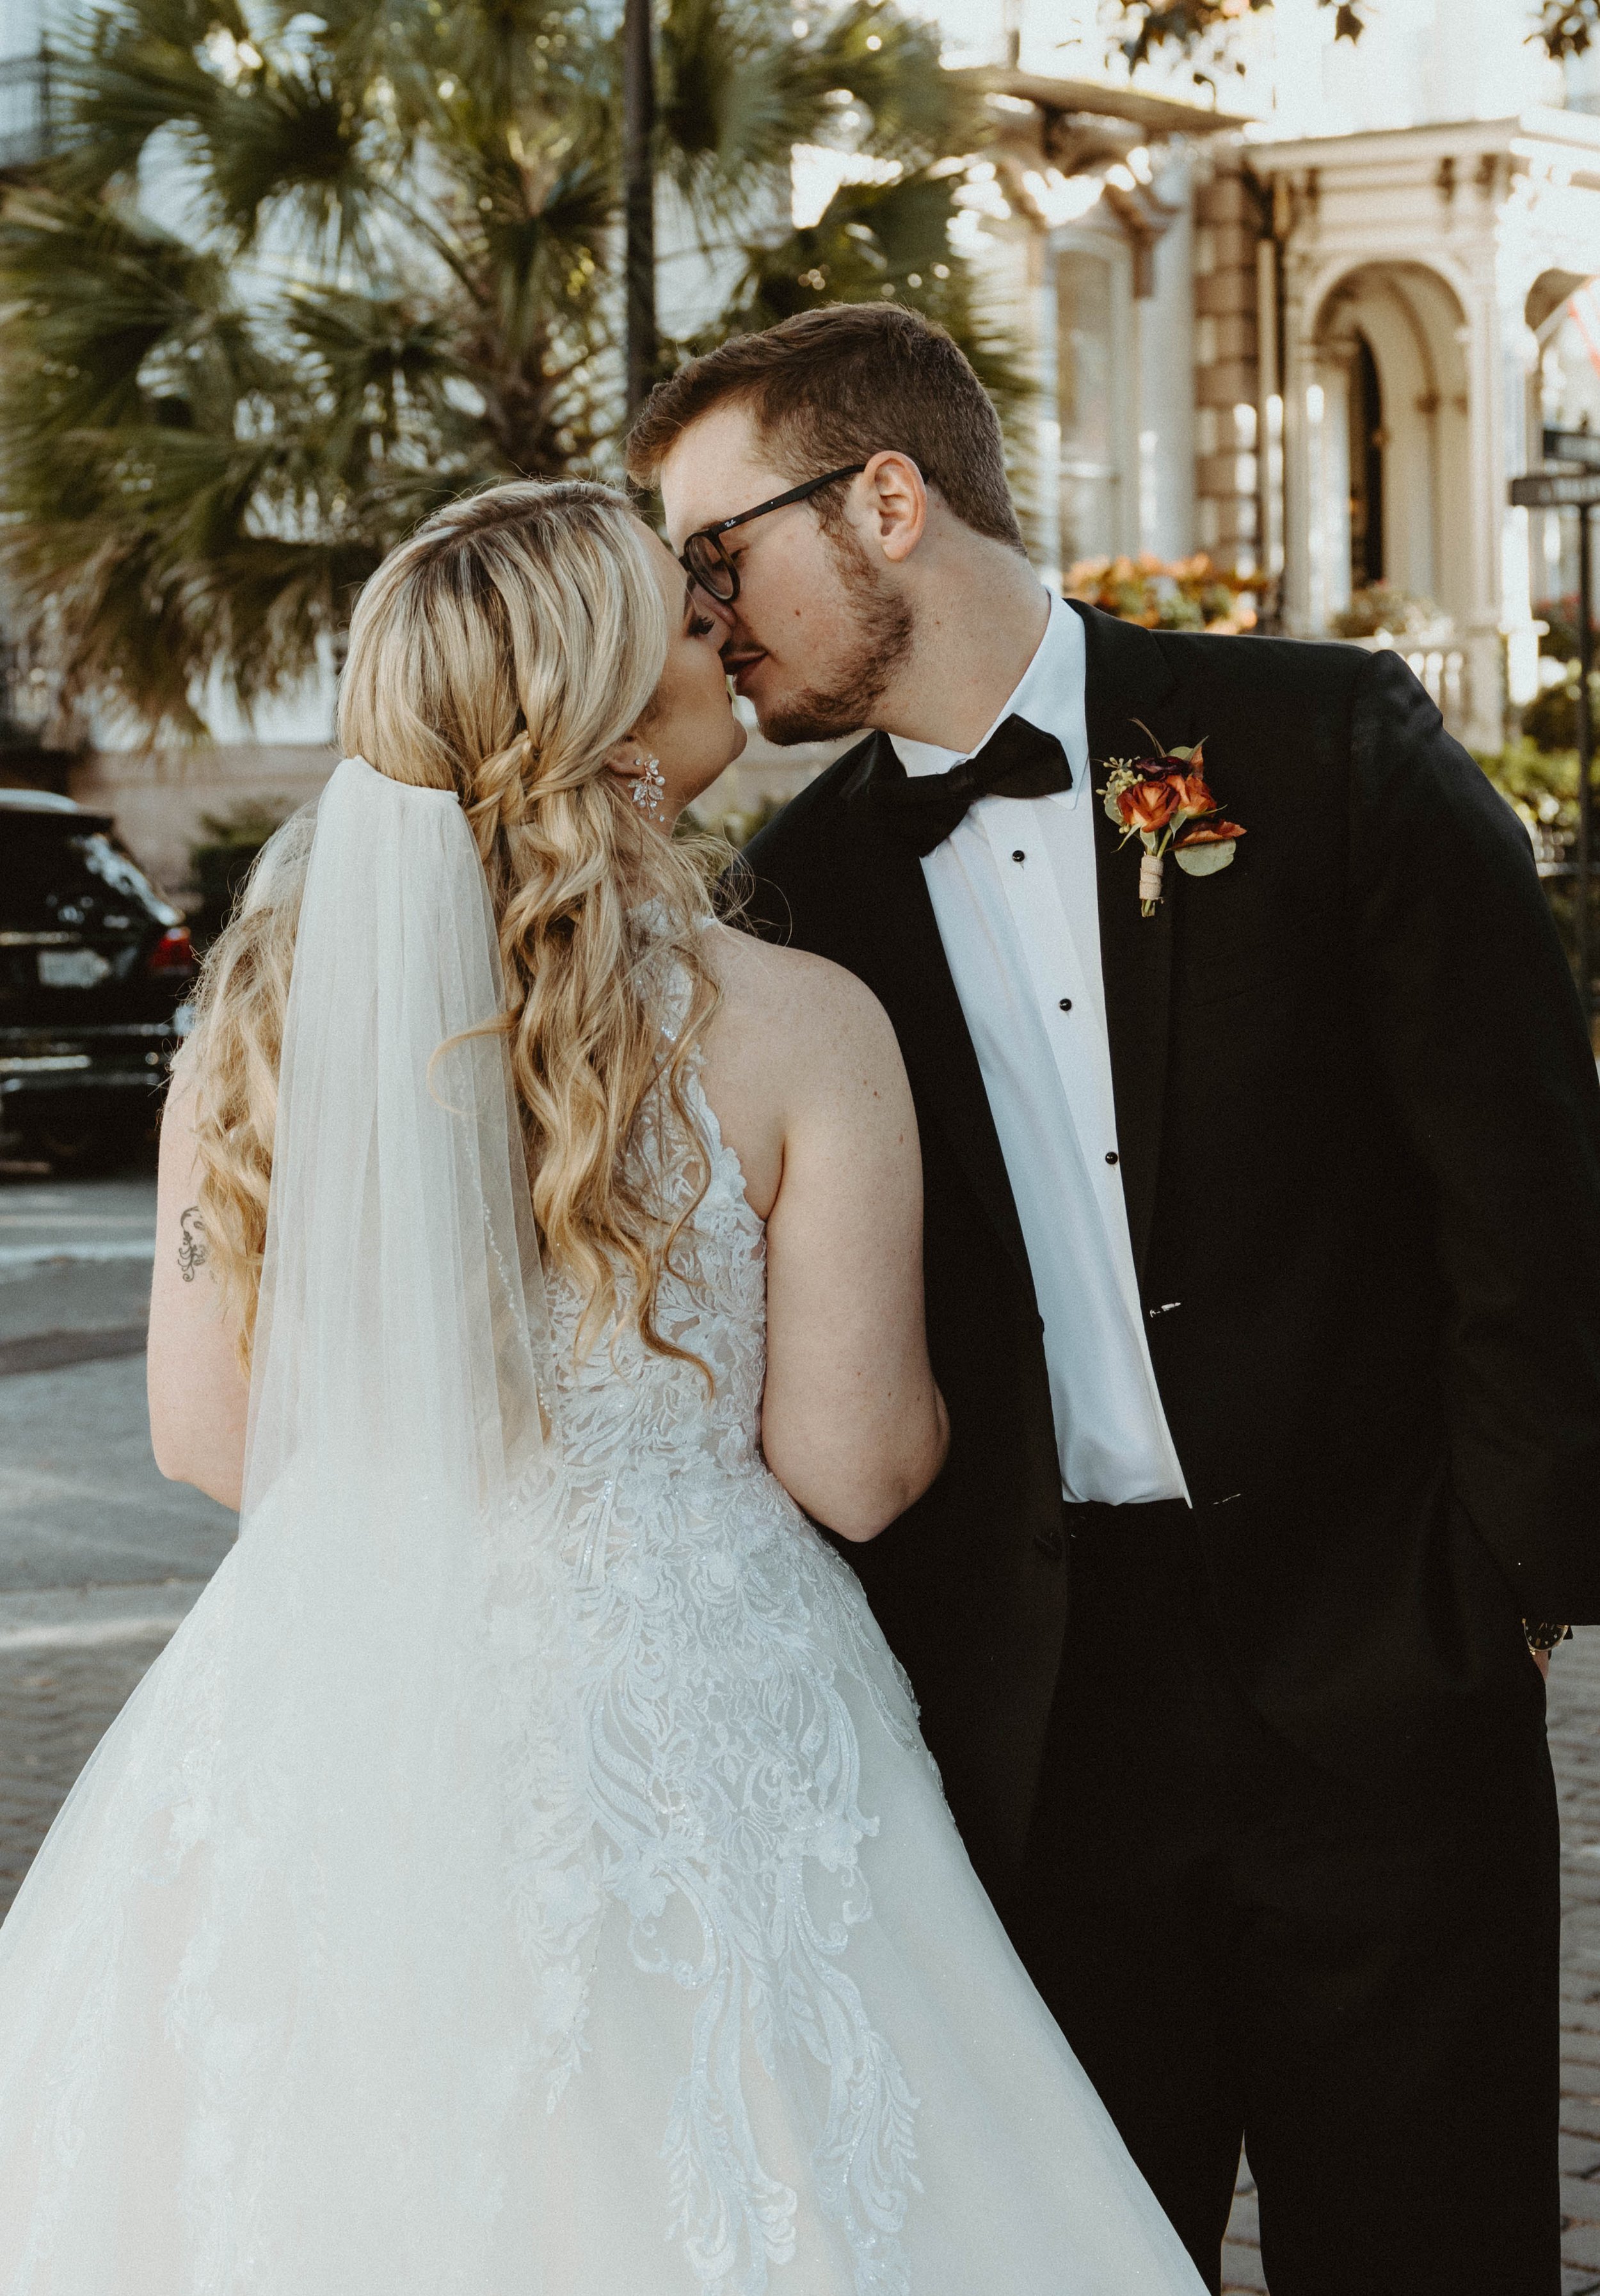 Ivory-and-beau-bride-ansley-bought-sparkly-and-traditional-highneck-ballgown-at-savannah-bridal-shop-gets-married-at-cathedral-with-the-help-of-ivory-and-beau-who-created-floral-peices-for-the-ceremony-and-reception-in-their-savannah-florwer-shop-11.jpg